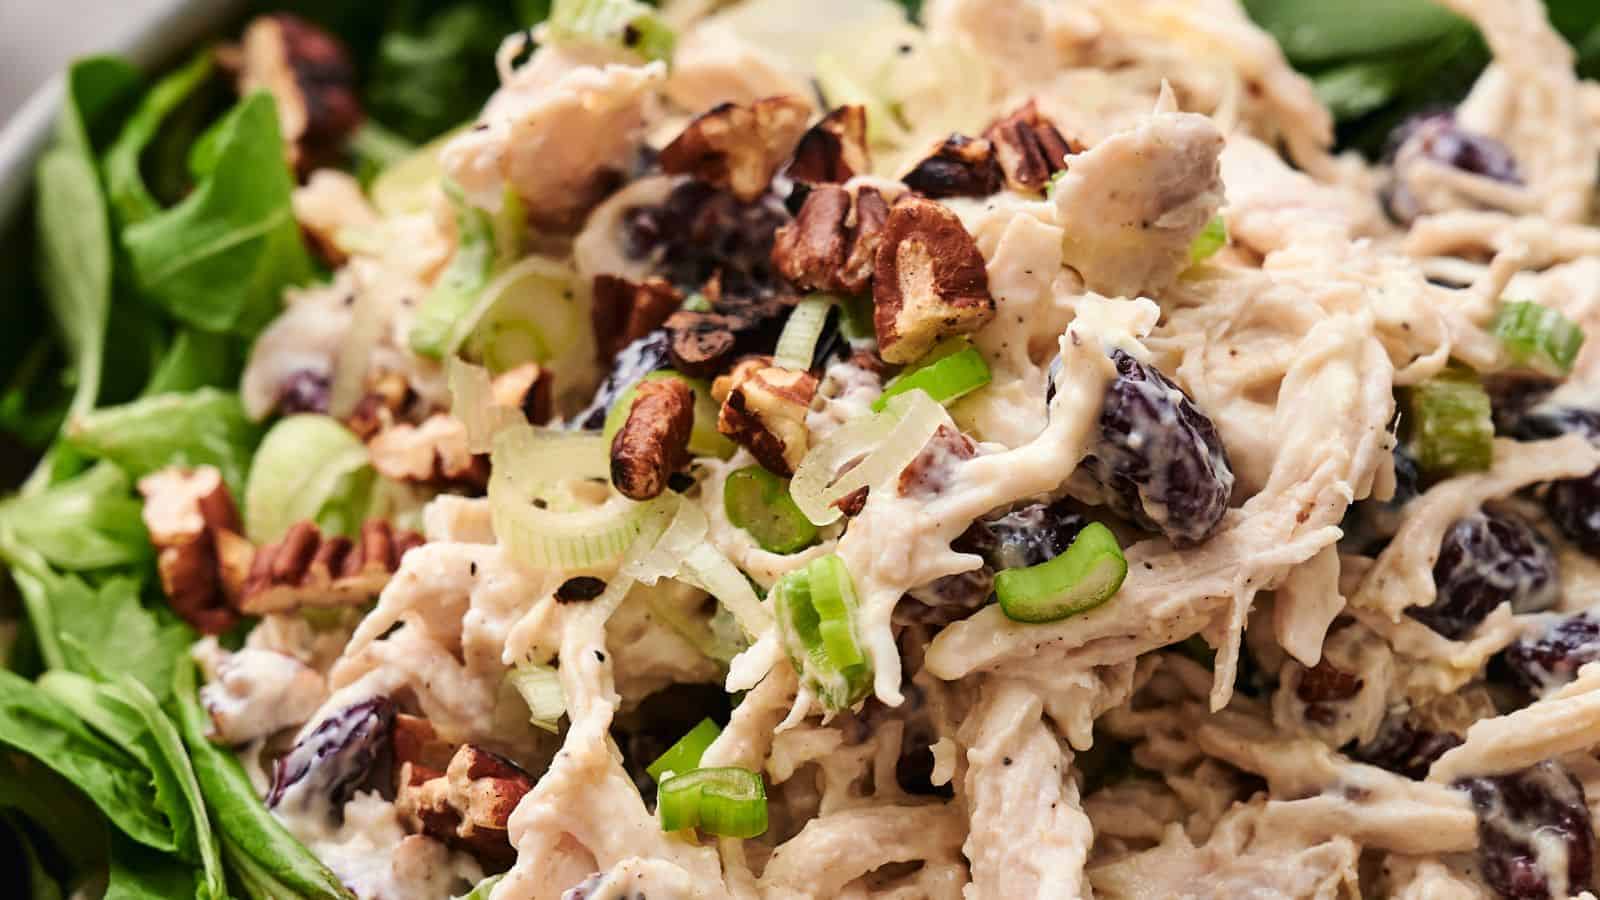 Close-up of a flavorful chicken salad with diced chicken, green onions, chopped pecans, and raisins, all served on a bed of fresh spinach leaves.